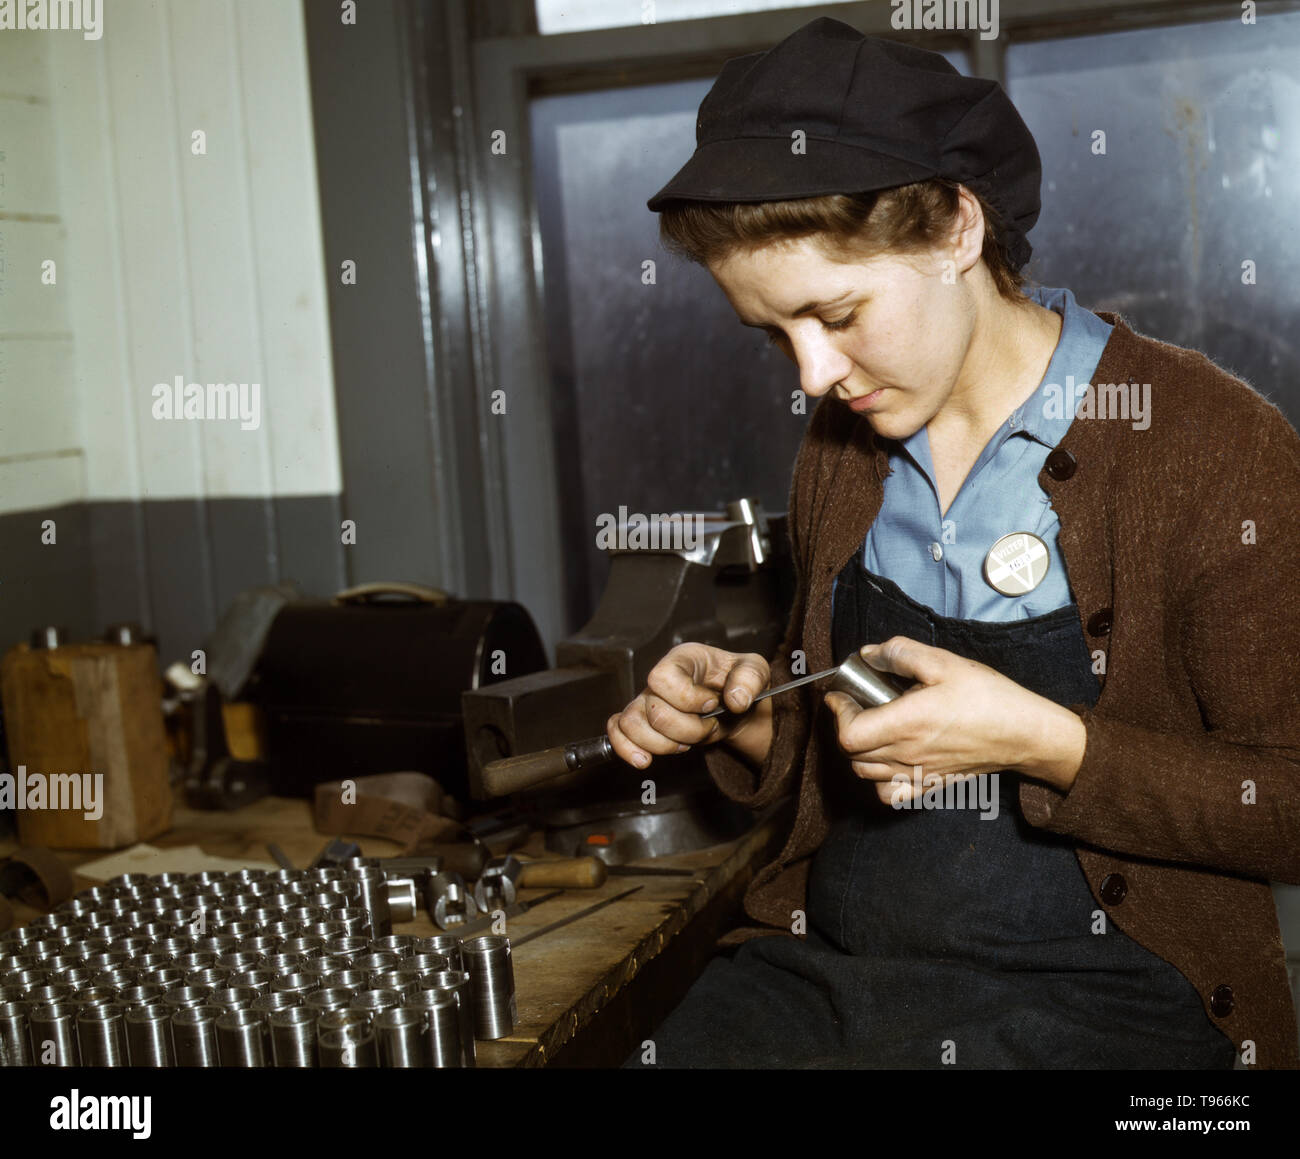 War production workers at the Vilter Manufacturing Company making M5 and M7 guns for the U.S. Army, Milwaukee, Wisconsin. Ex-housewife, age 24, filing small parts. Her husband and brother are in the armed service. Although the image of 'Rosie the Riveter' reflected the industrial work of welders and riveters, the majority of working women filled non-factory positions in every sector of the economy. What unified the experiences of these women was that they proved to themselves, and the country, that they could do a man's job and could do it well. Photographed by Howard R. Hollem, 1943. Stock Photo